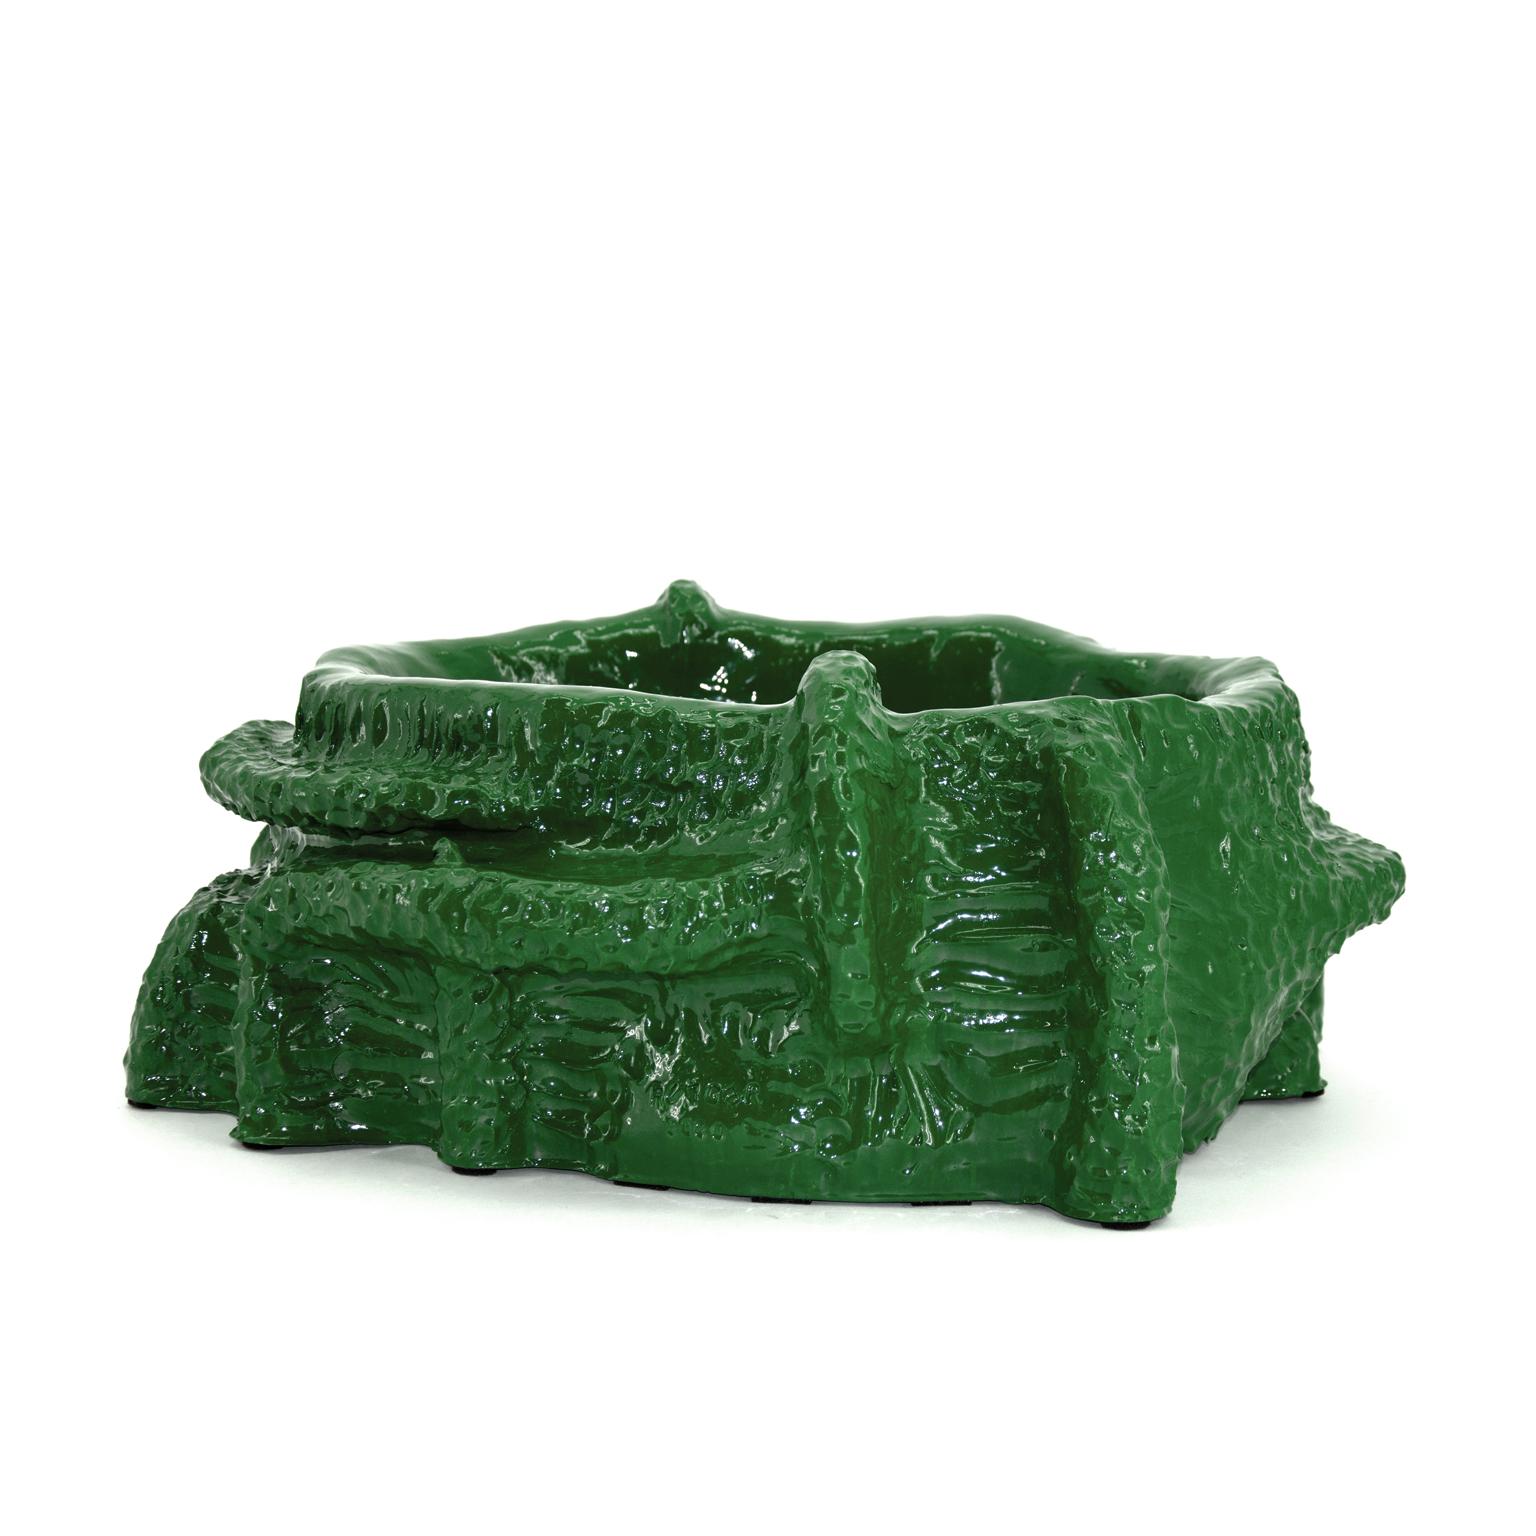 Unique large vessel, hand build by the artist in 2020. The unique technique Rutger de Regt has developed, enabled the unique imagery of the series. Contemporary ceramic vessel, oxide green high gloss finish is part of the second series.

Oxide